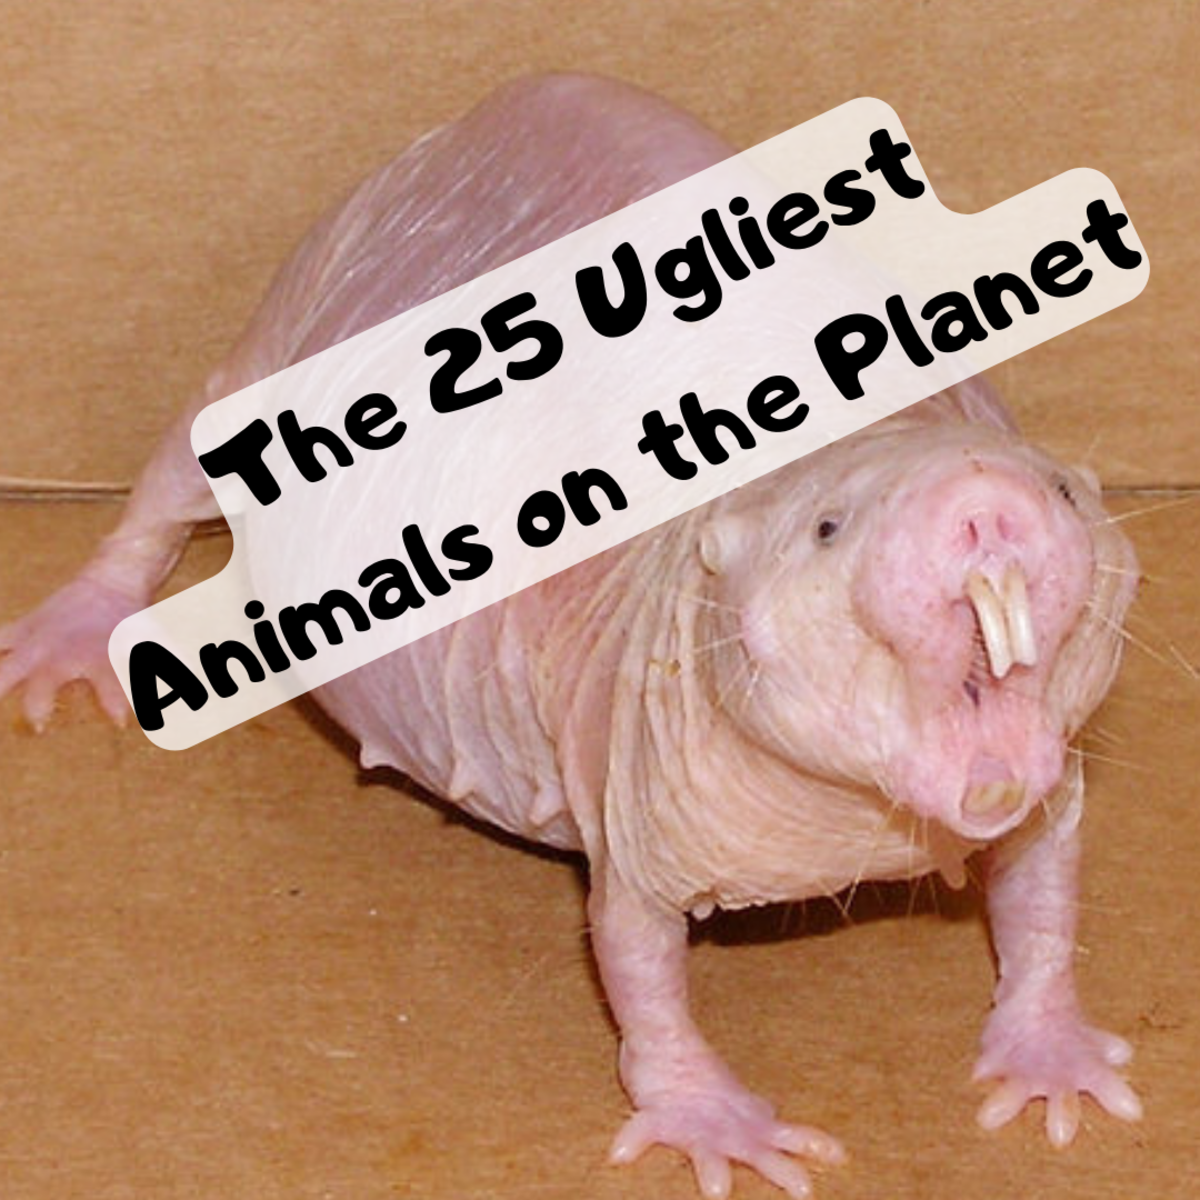 Read on to find a list of the 25 ugliest creatures in existence. You'll also learn a few things about each bizarre animal along the way!